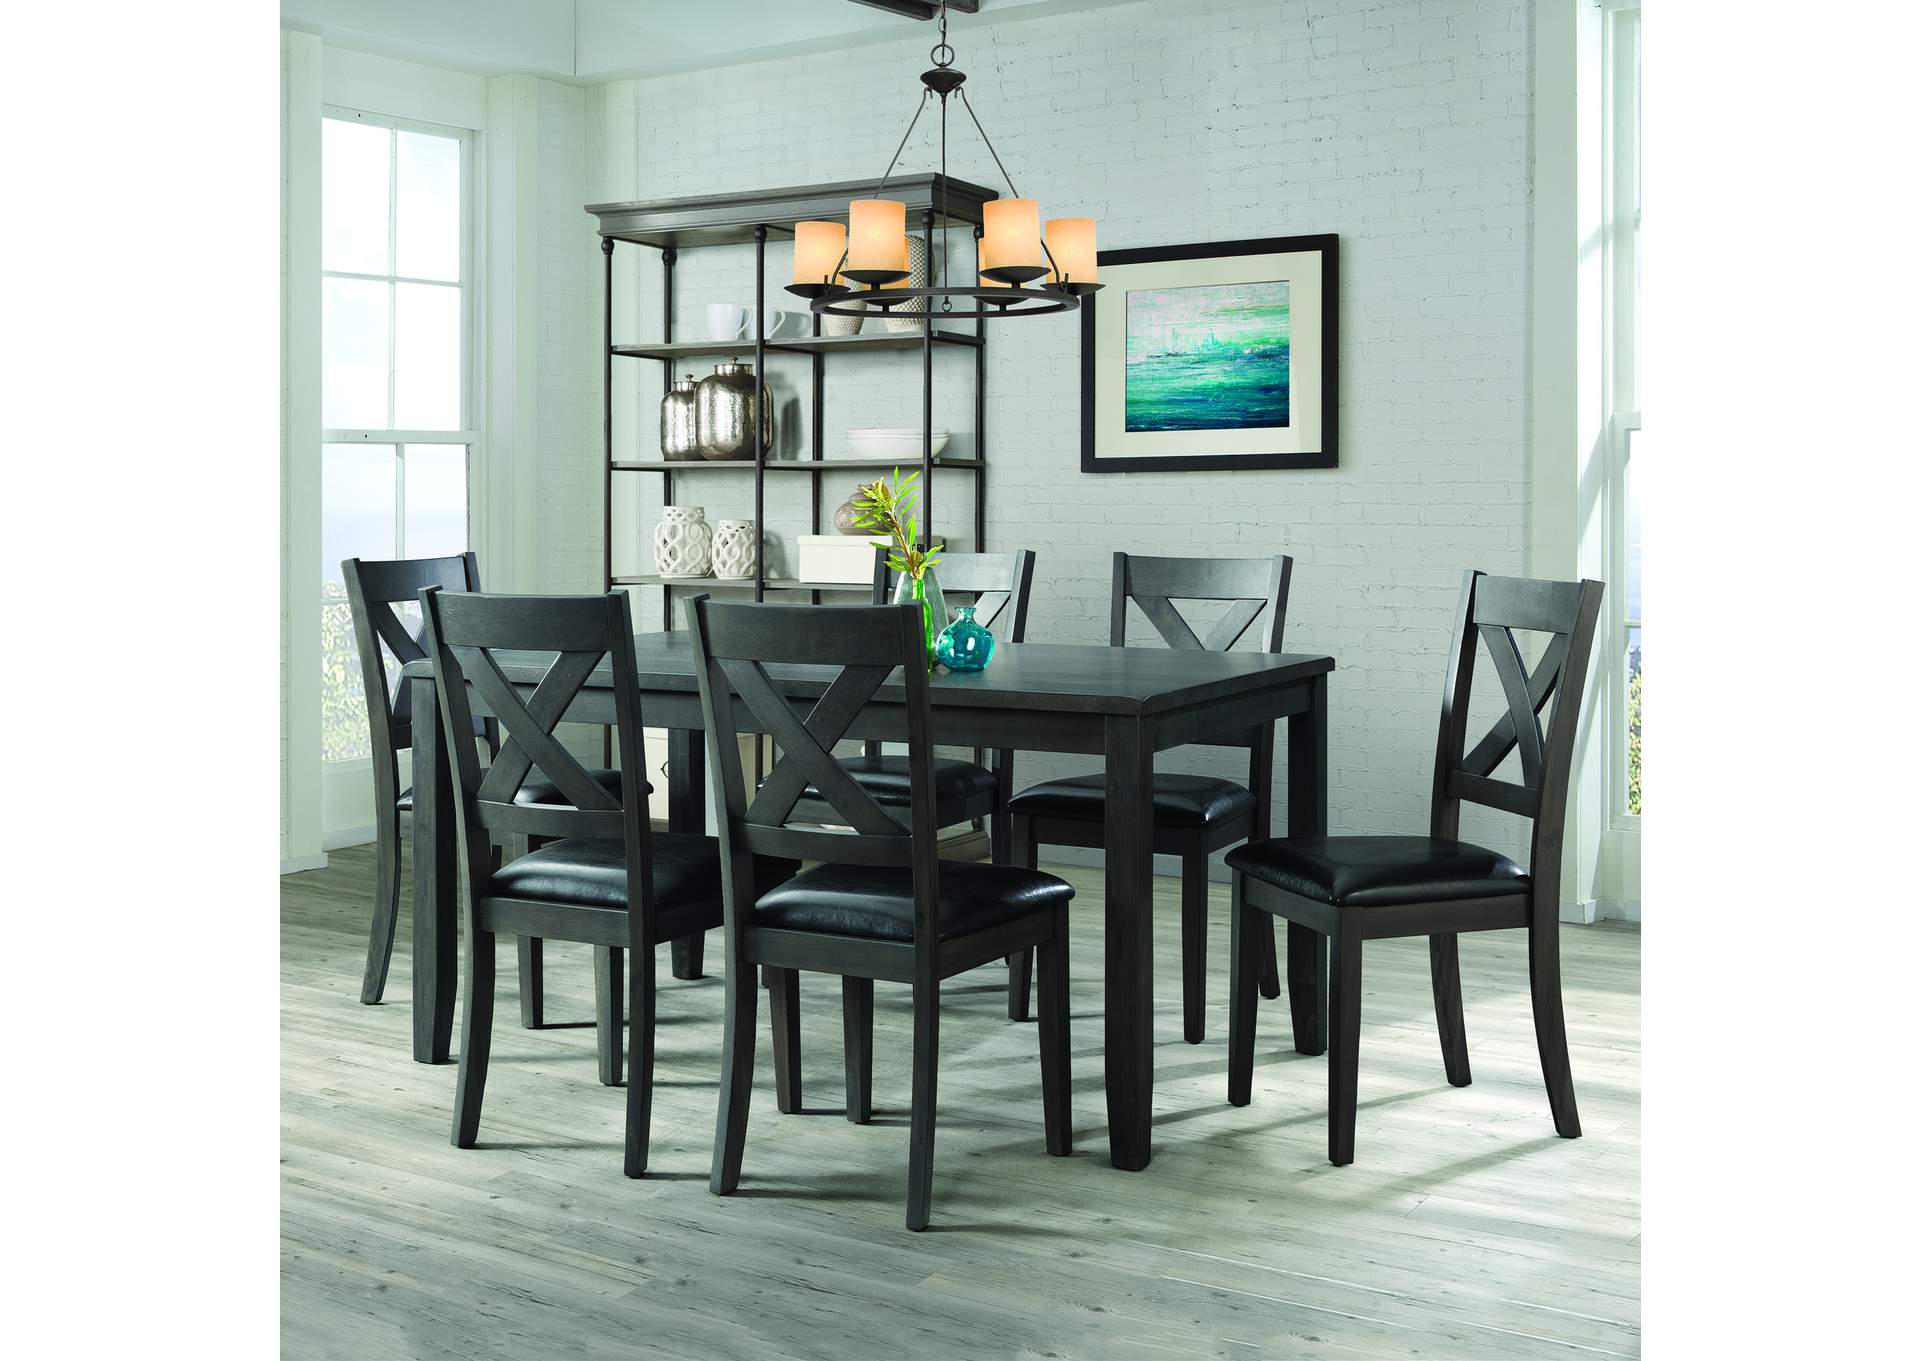 Alex Grey 60 7 Pc Dining Set Grey Table With Black Pu Seat,Elements